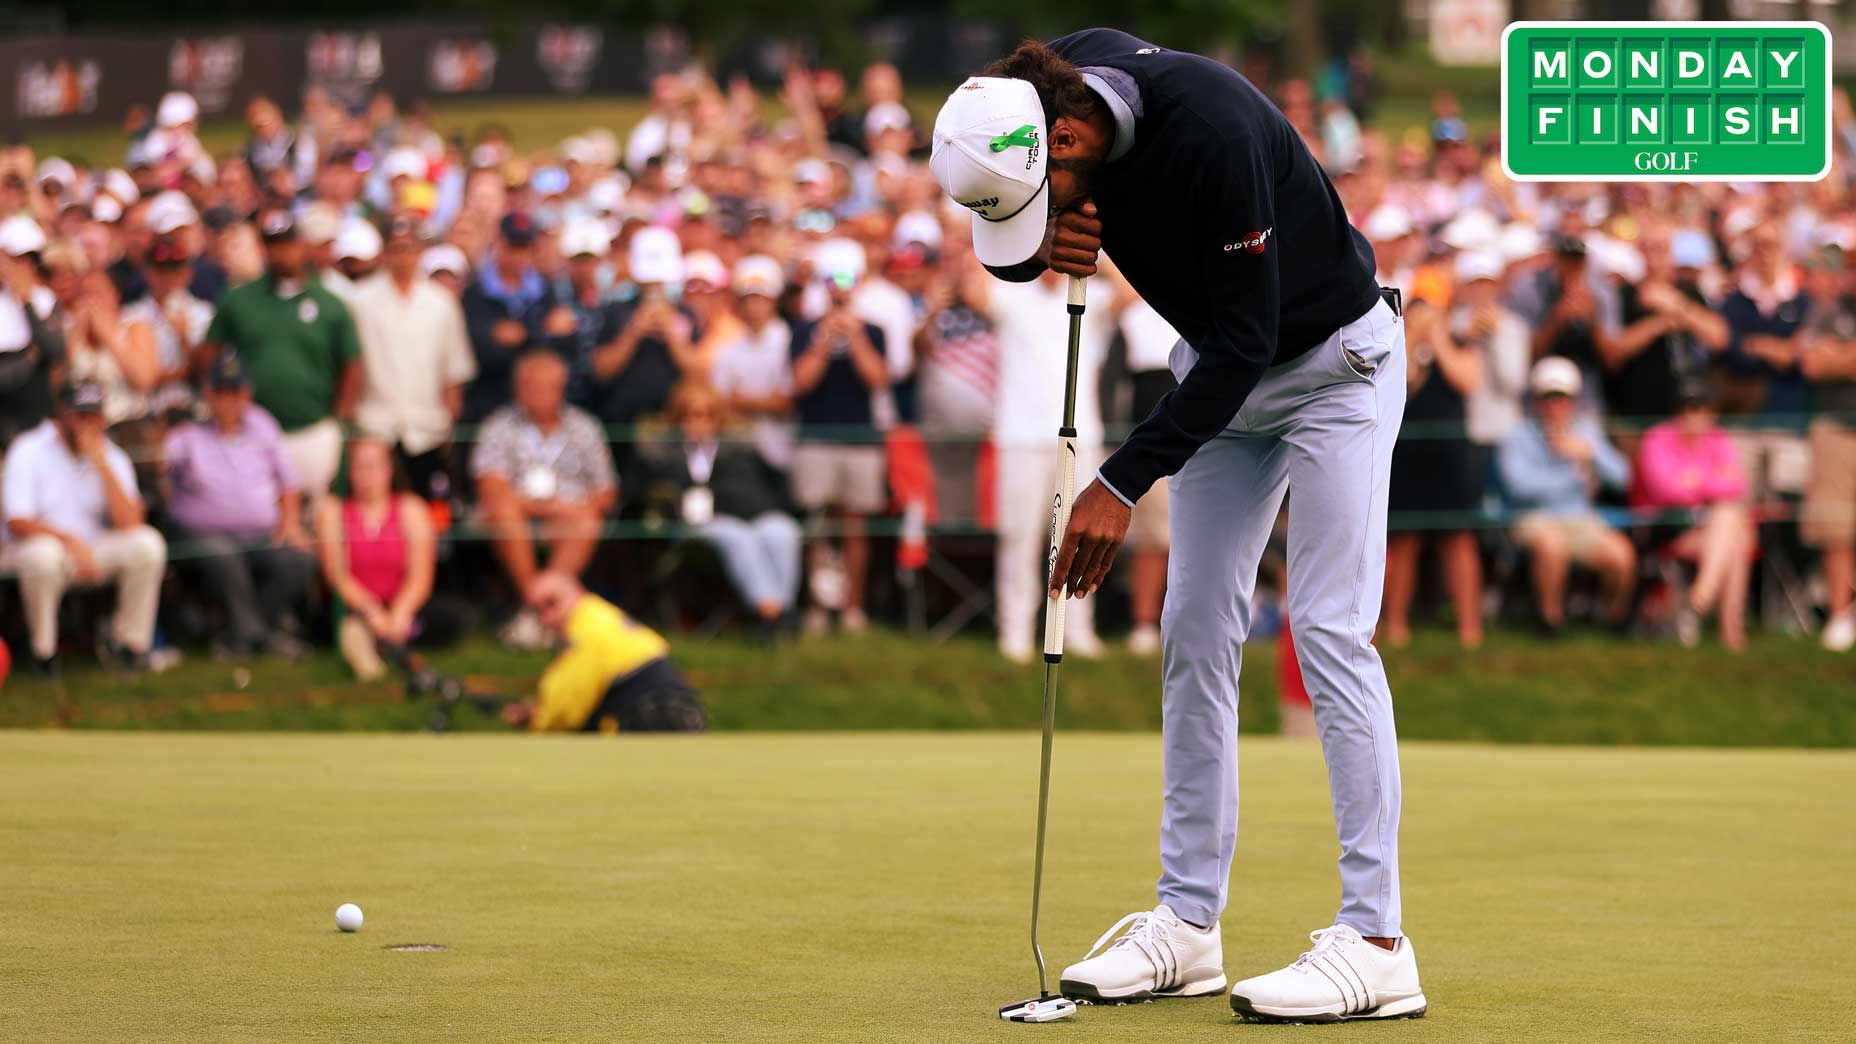 Akshay Bhatia missed a putt that would have forced a playoff in Detroit.